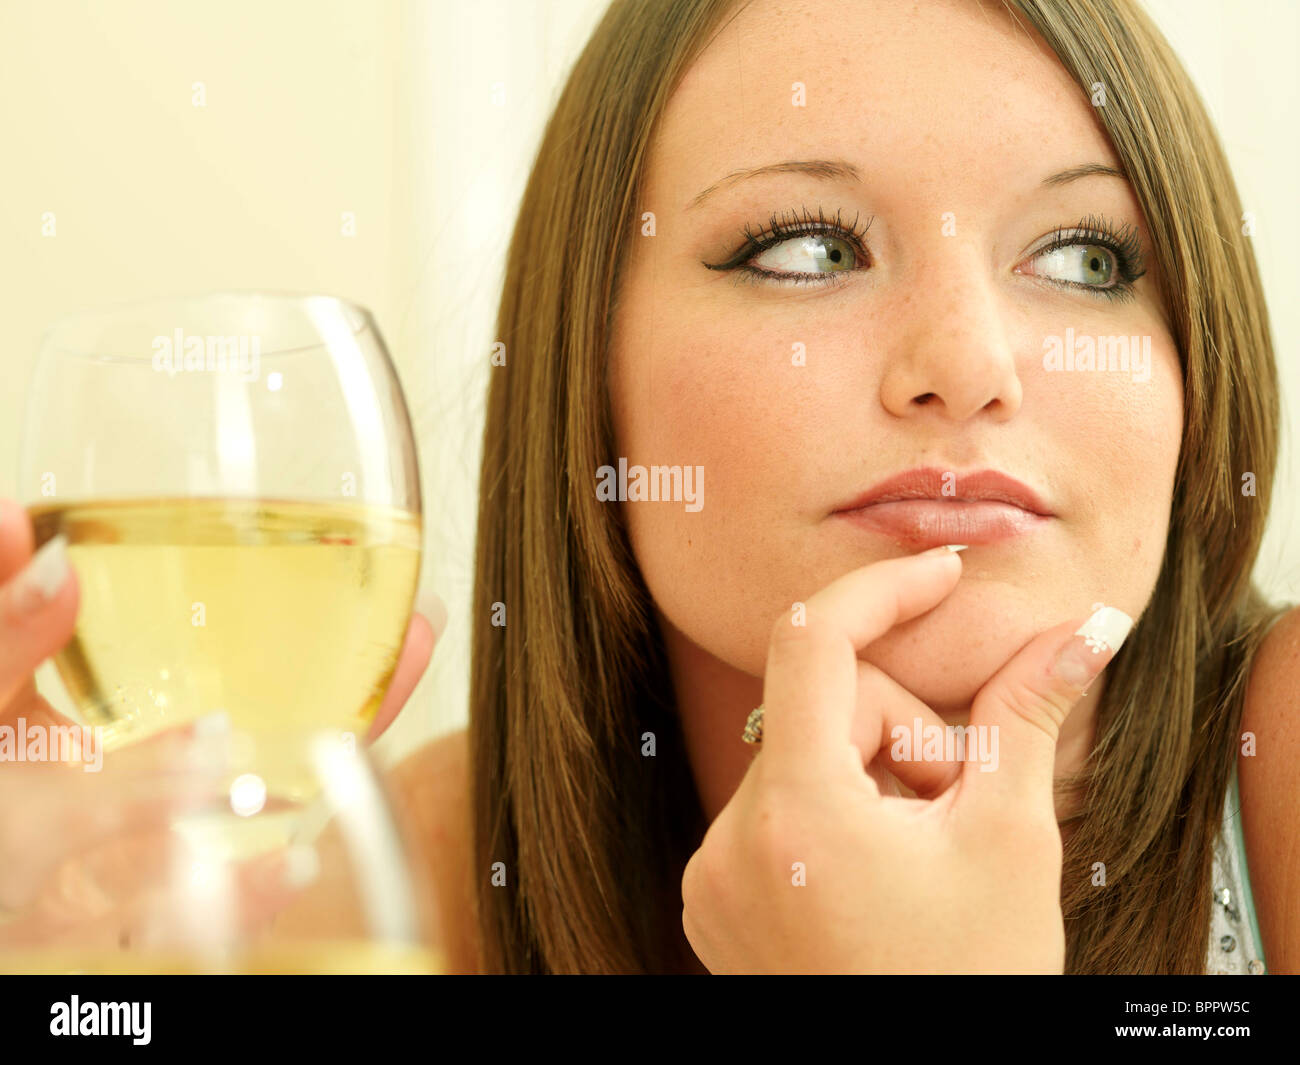 Young Women Drinking Wine. Models Released Stock Photo